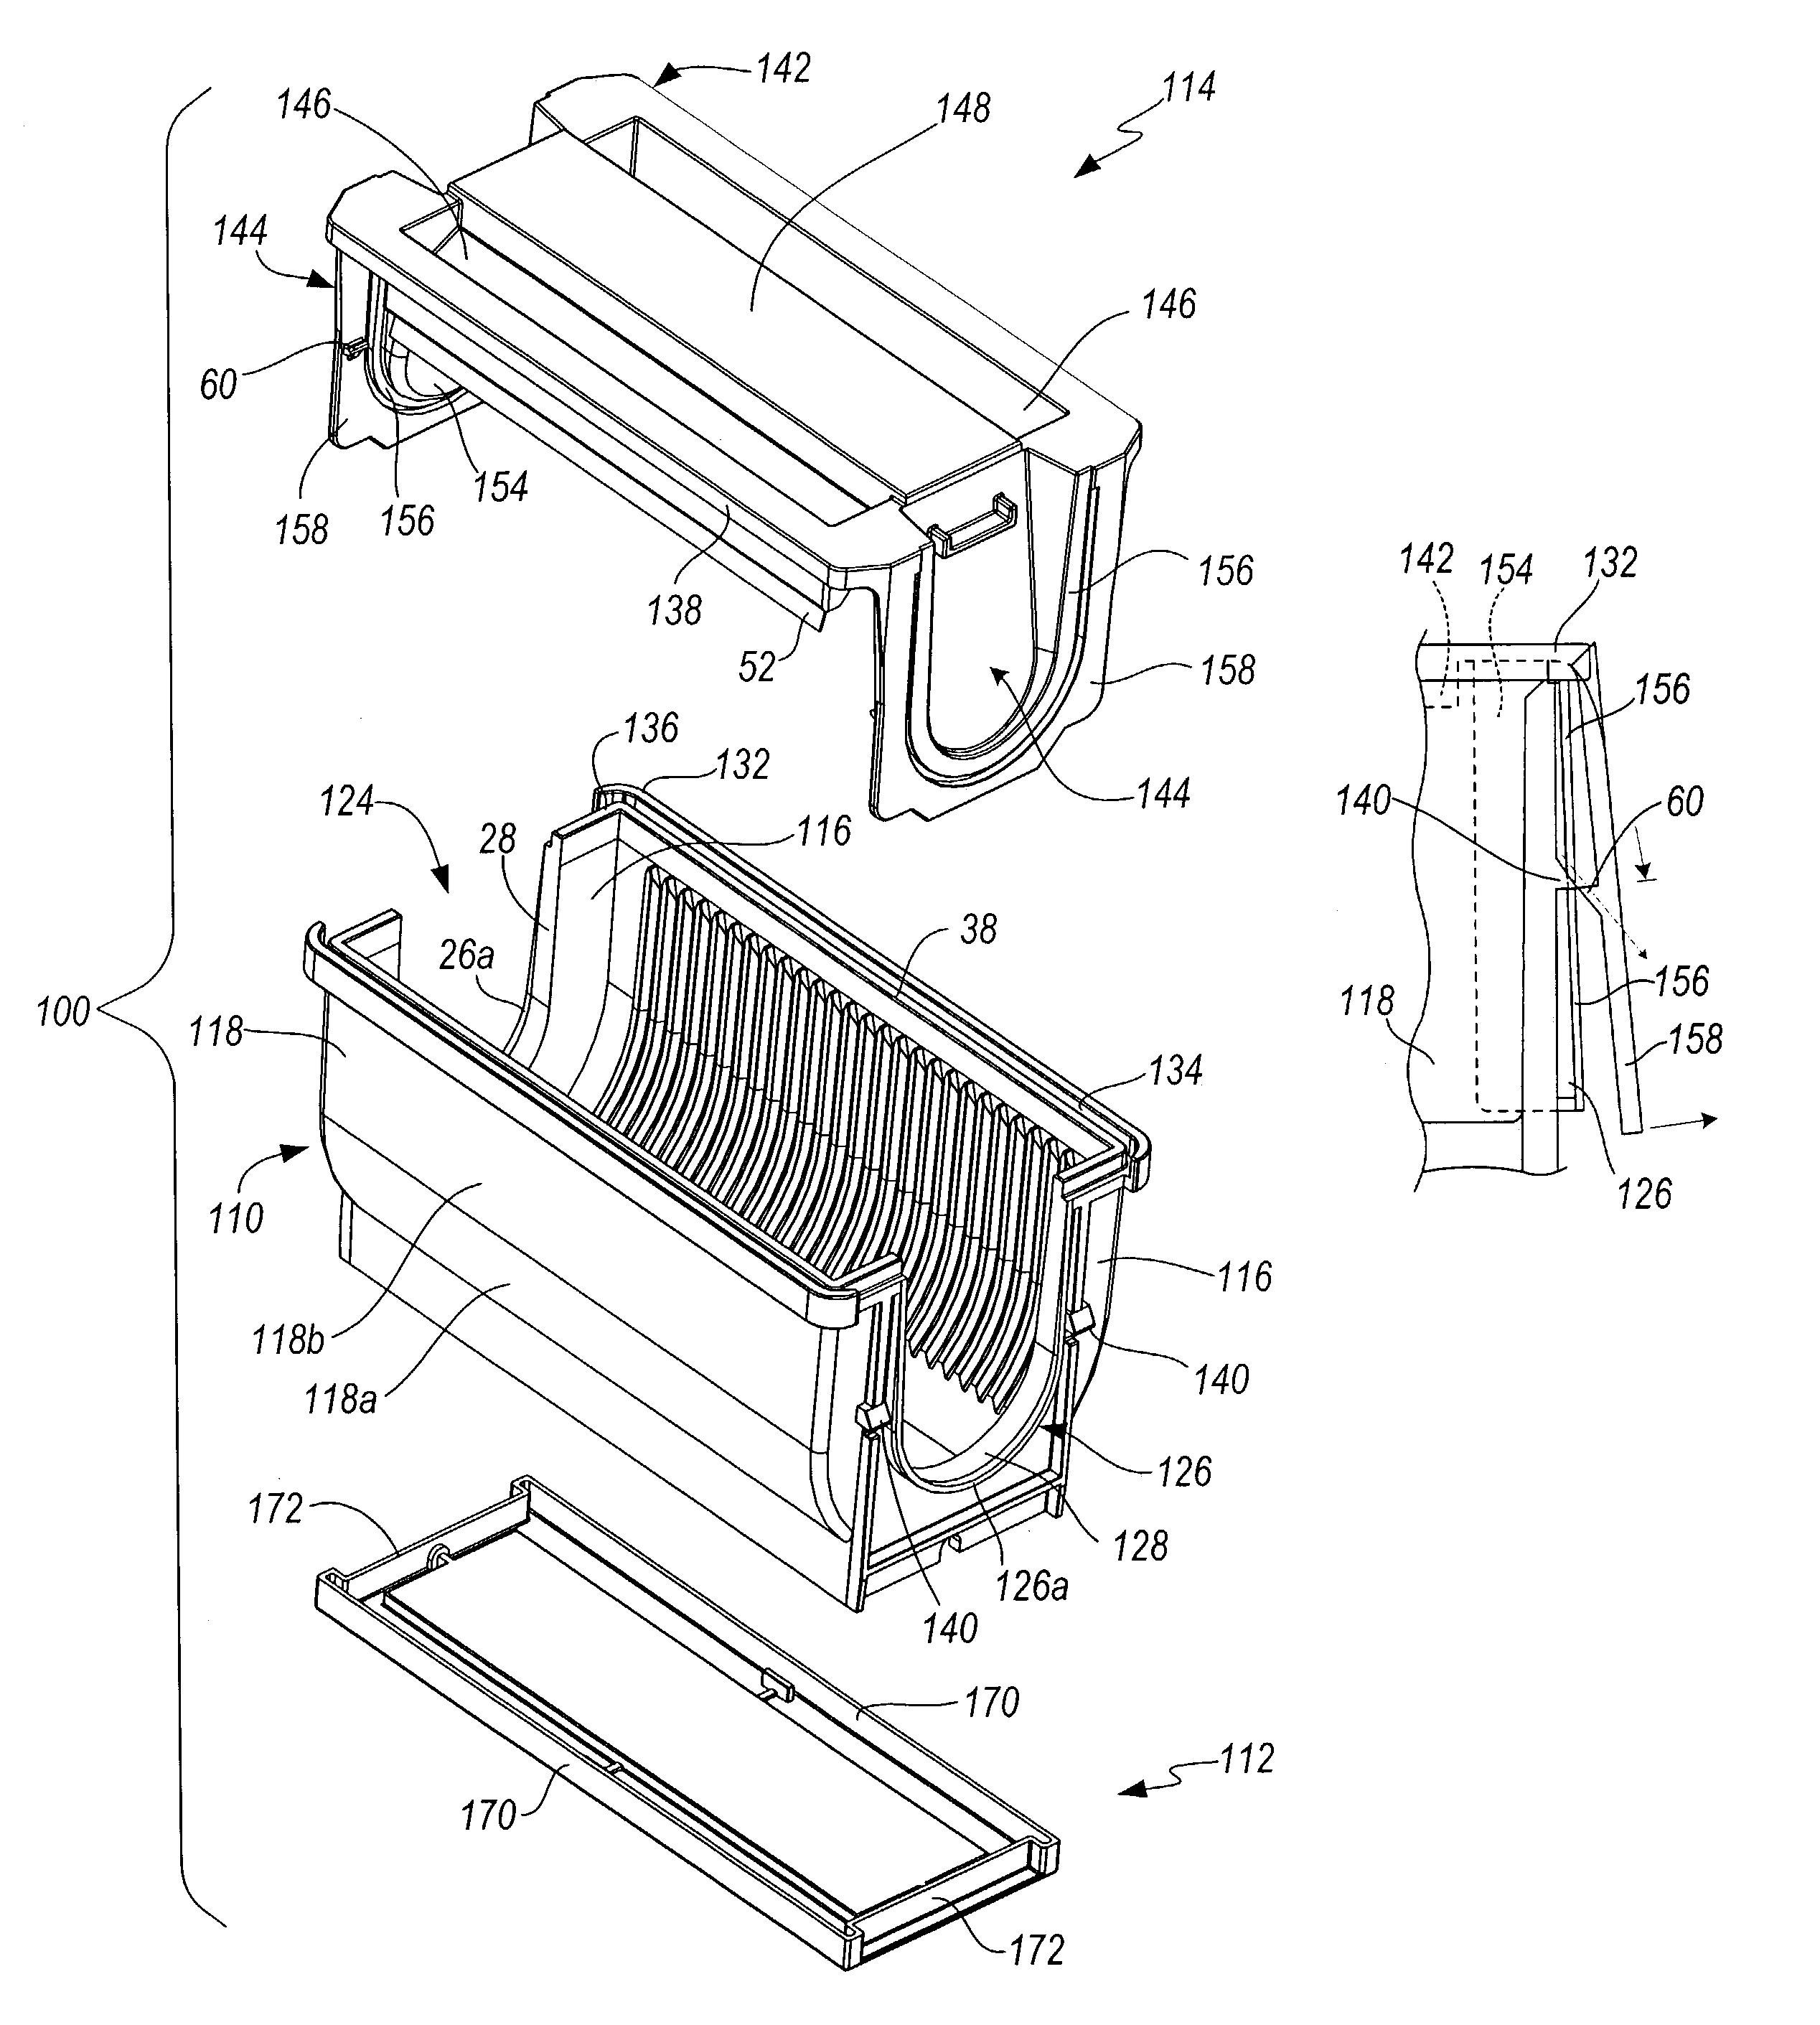 Memory disk shipping container with improved contaminant control